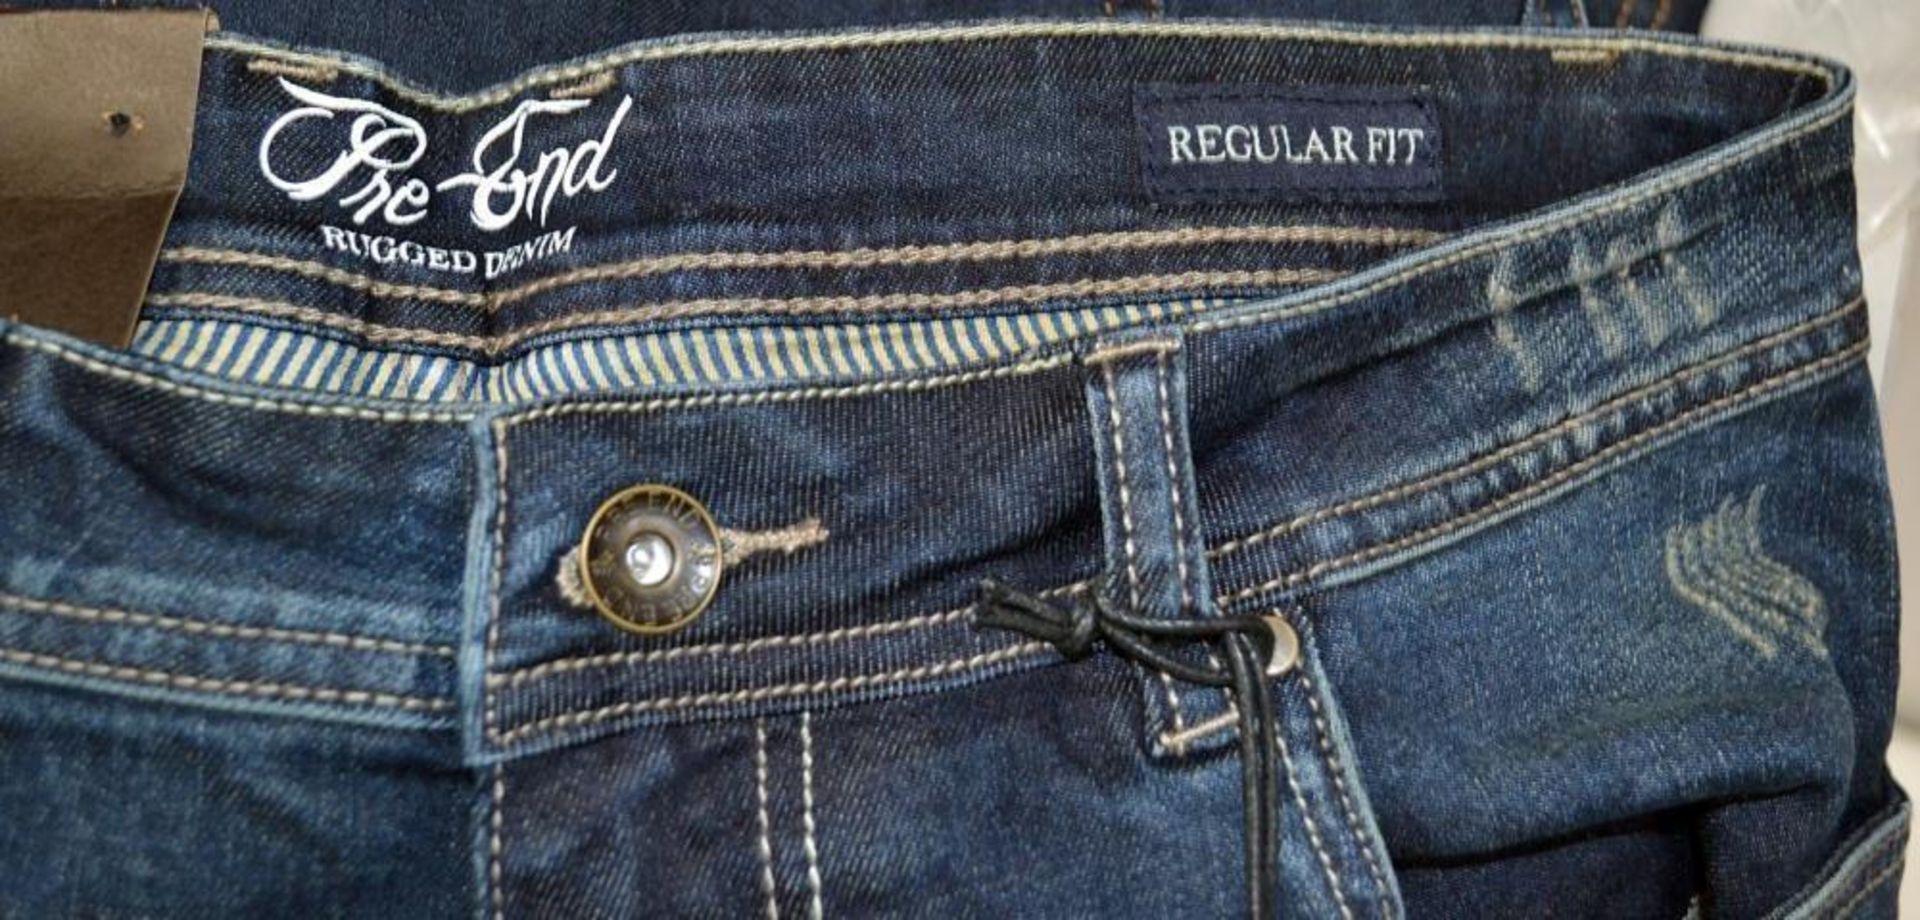 4 x Assorted Pairs Of PRE END Branded Mens Jeans - New Stock With Tags - Recent Retail Closure - - Image 5 of 5